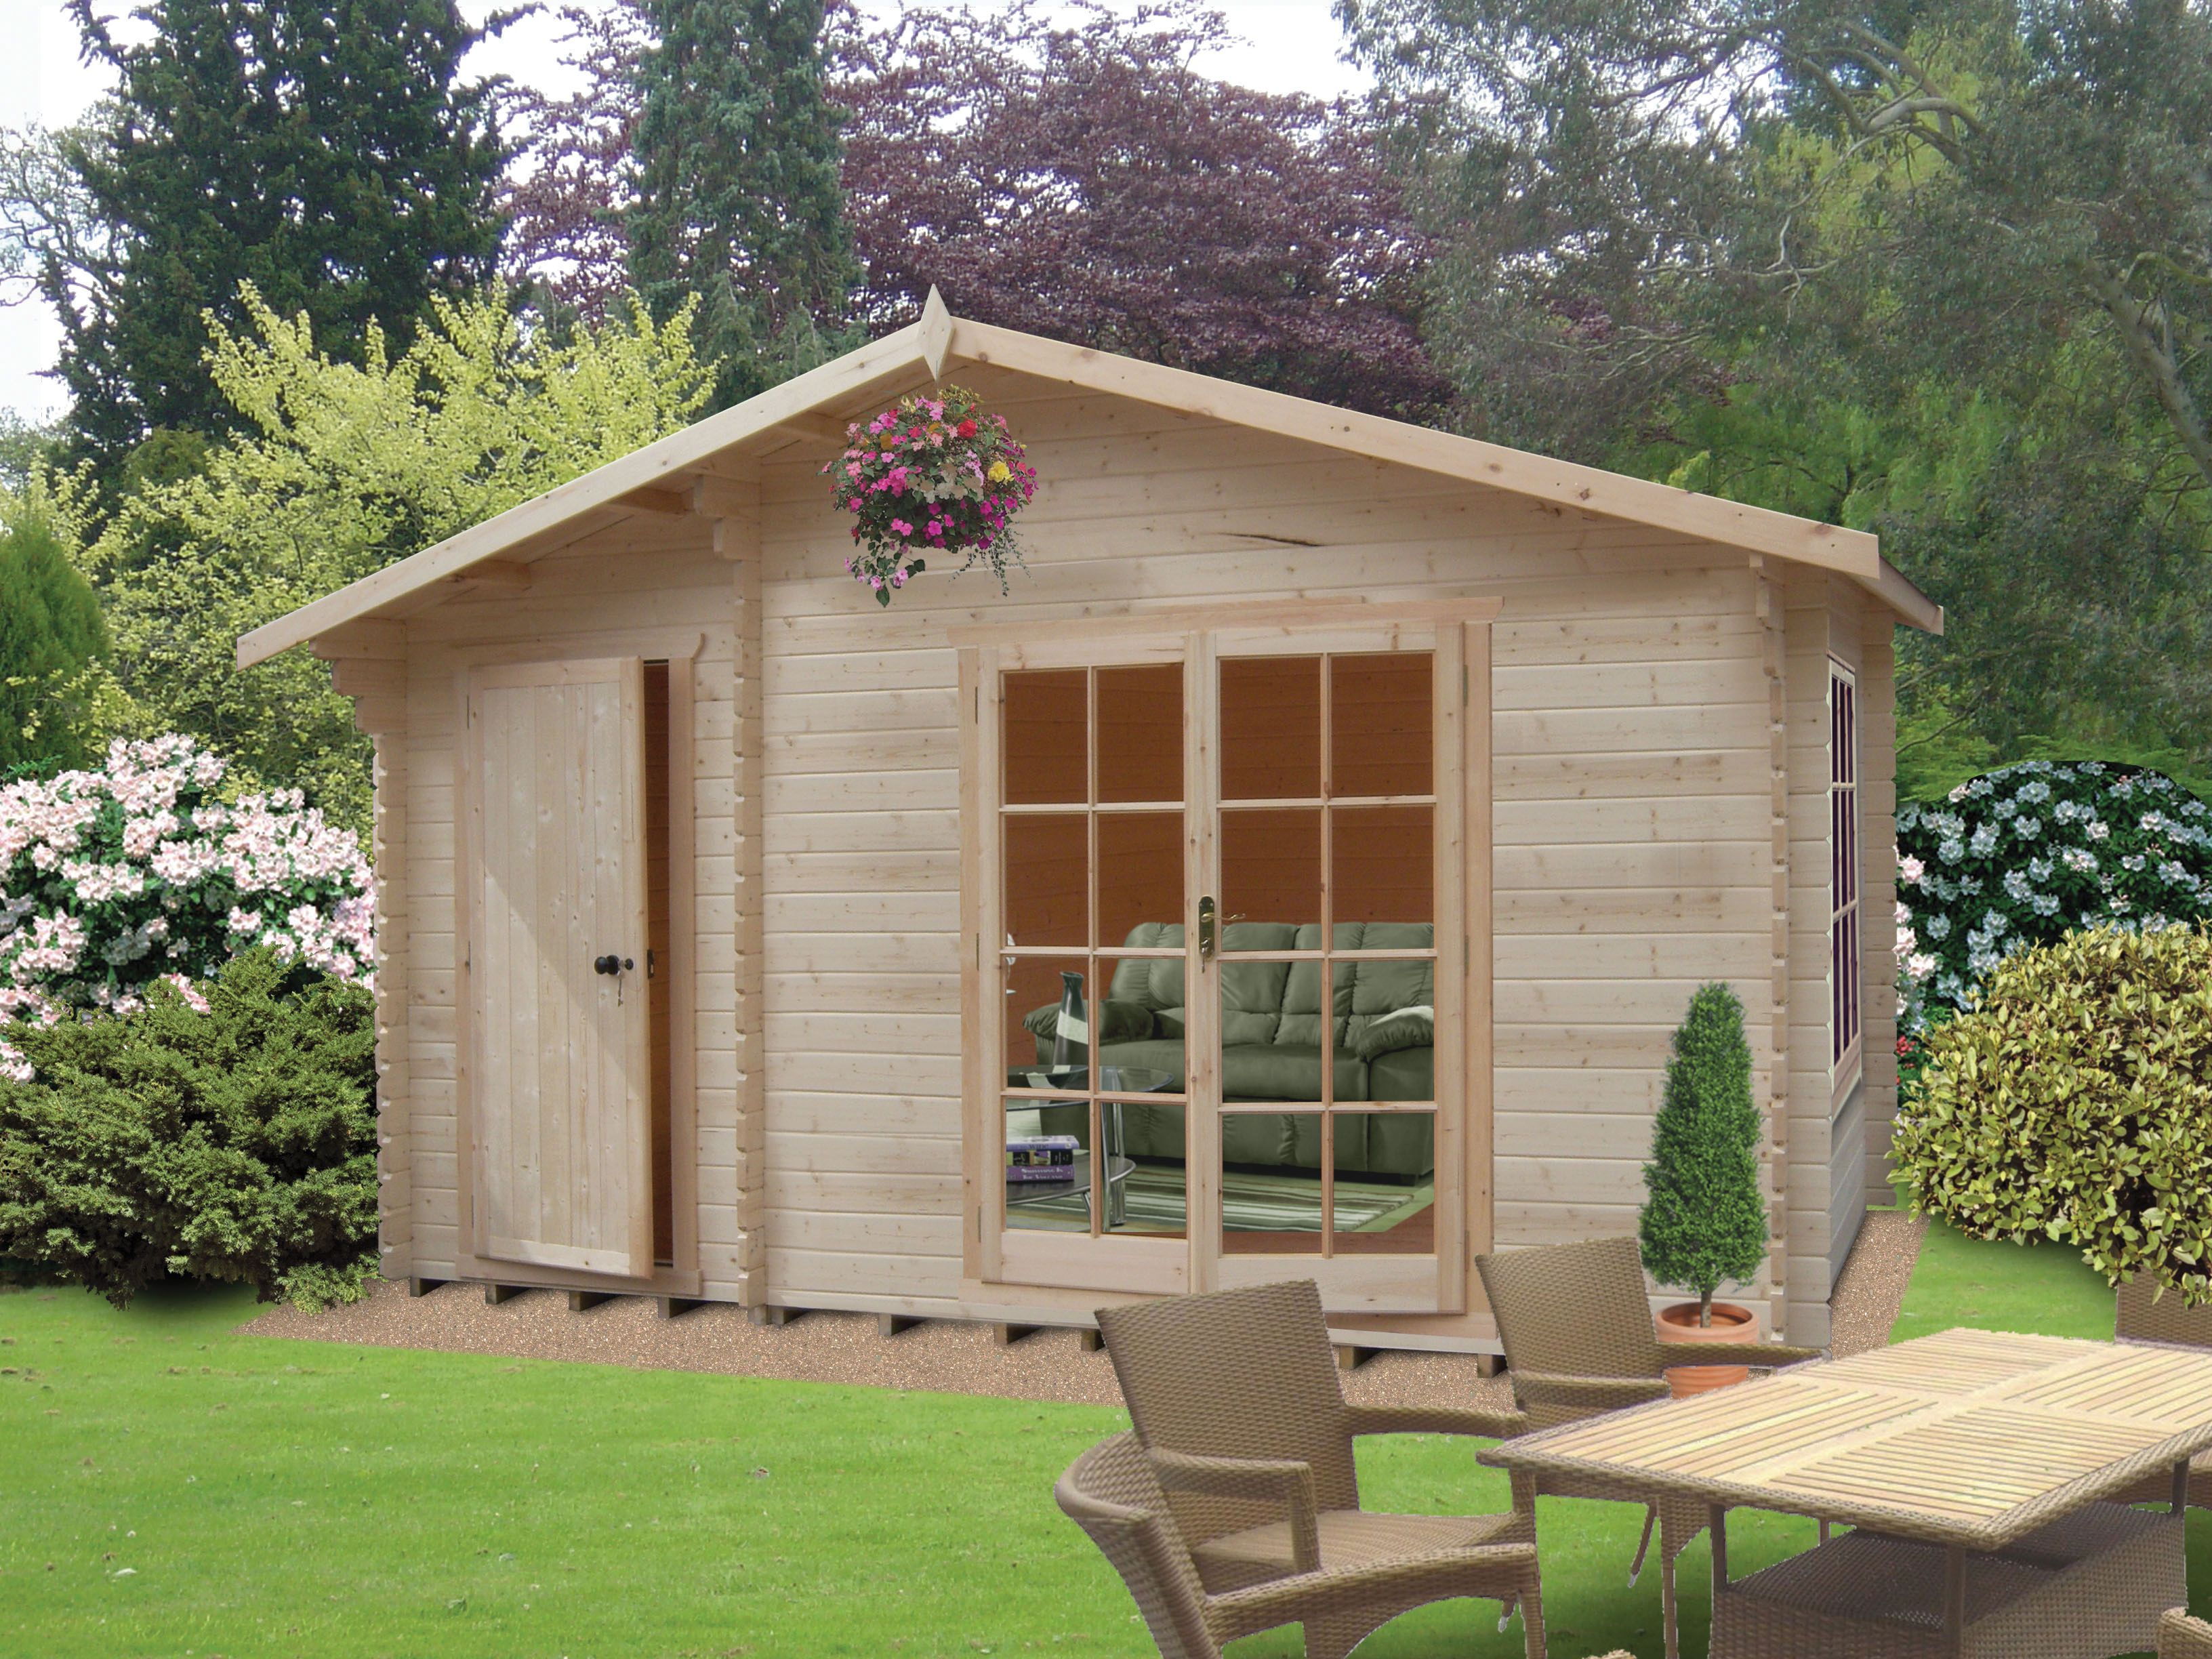 Image of Shire Bourne 14 x 8ft Double Door Log Cabin including Storage Room with Assembly